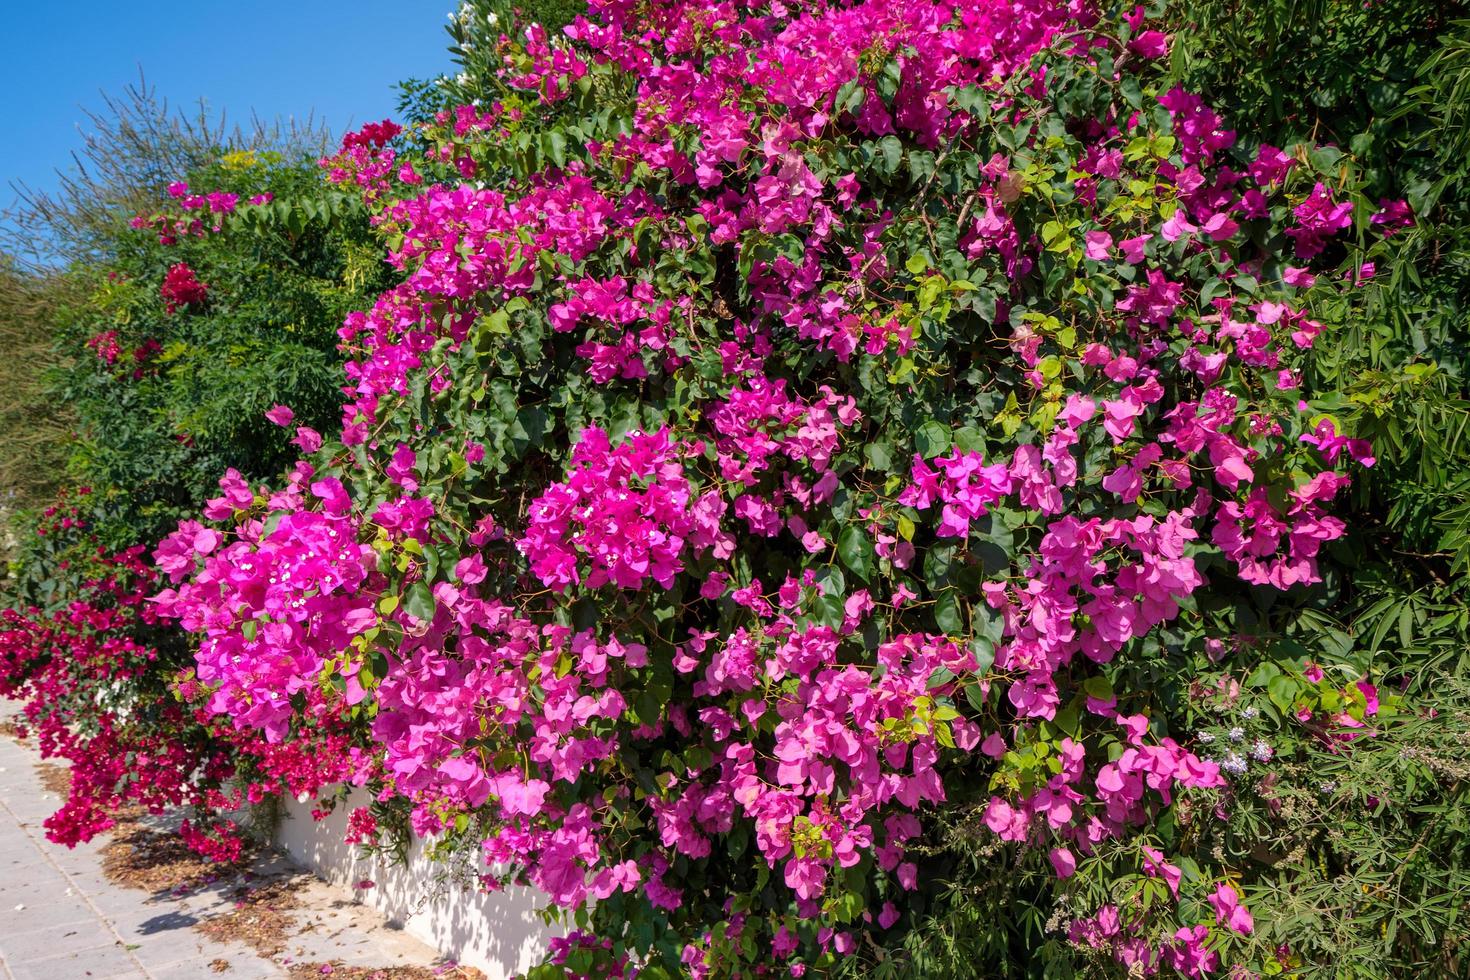 A large Bougainvillea shrub flowering profusely in Cyprus photo